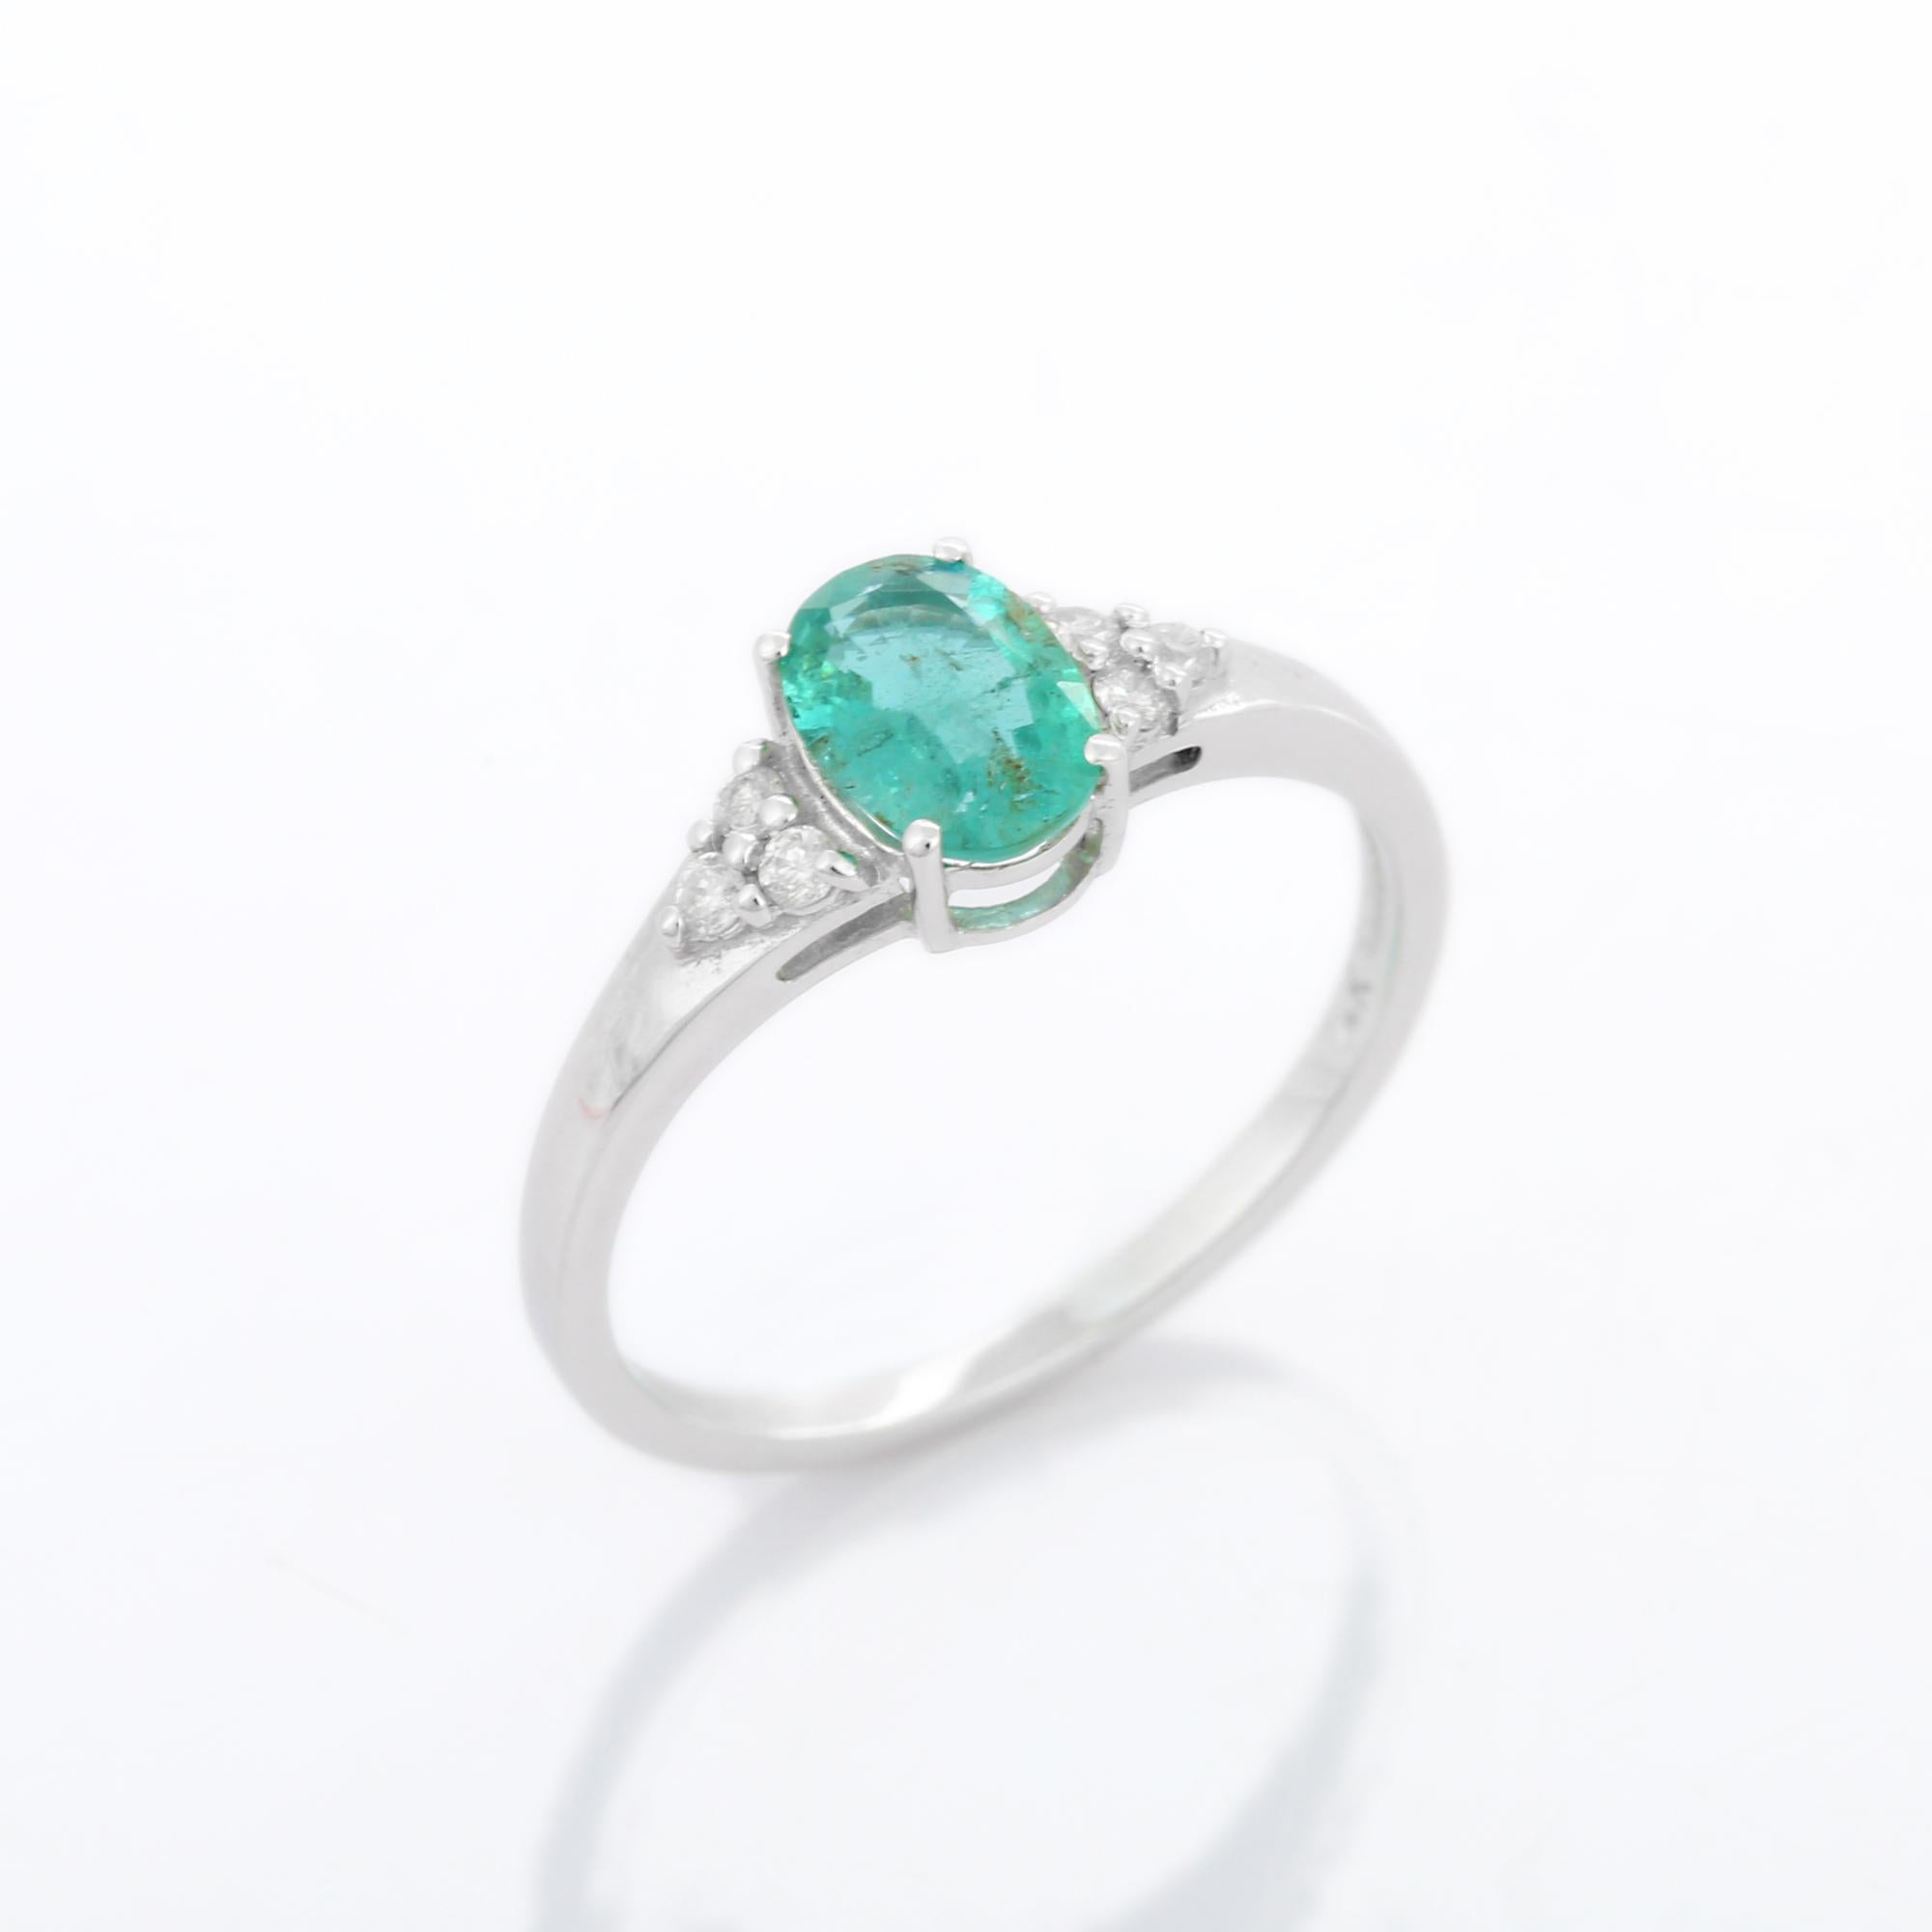 For Sale:  18k Solid White Gold Emerald Diamond Engagement Ring, Emerald Ring 8